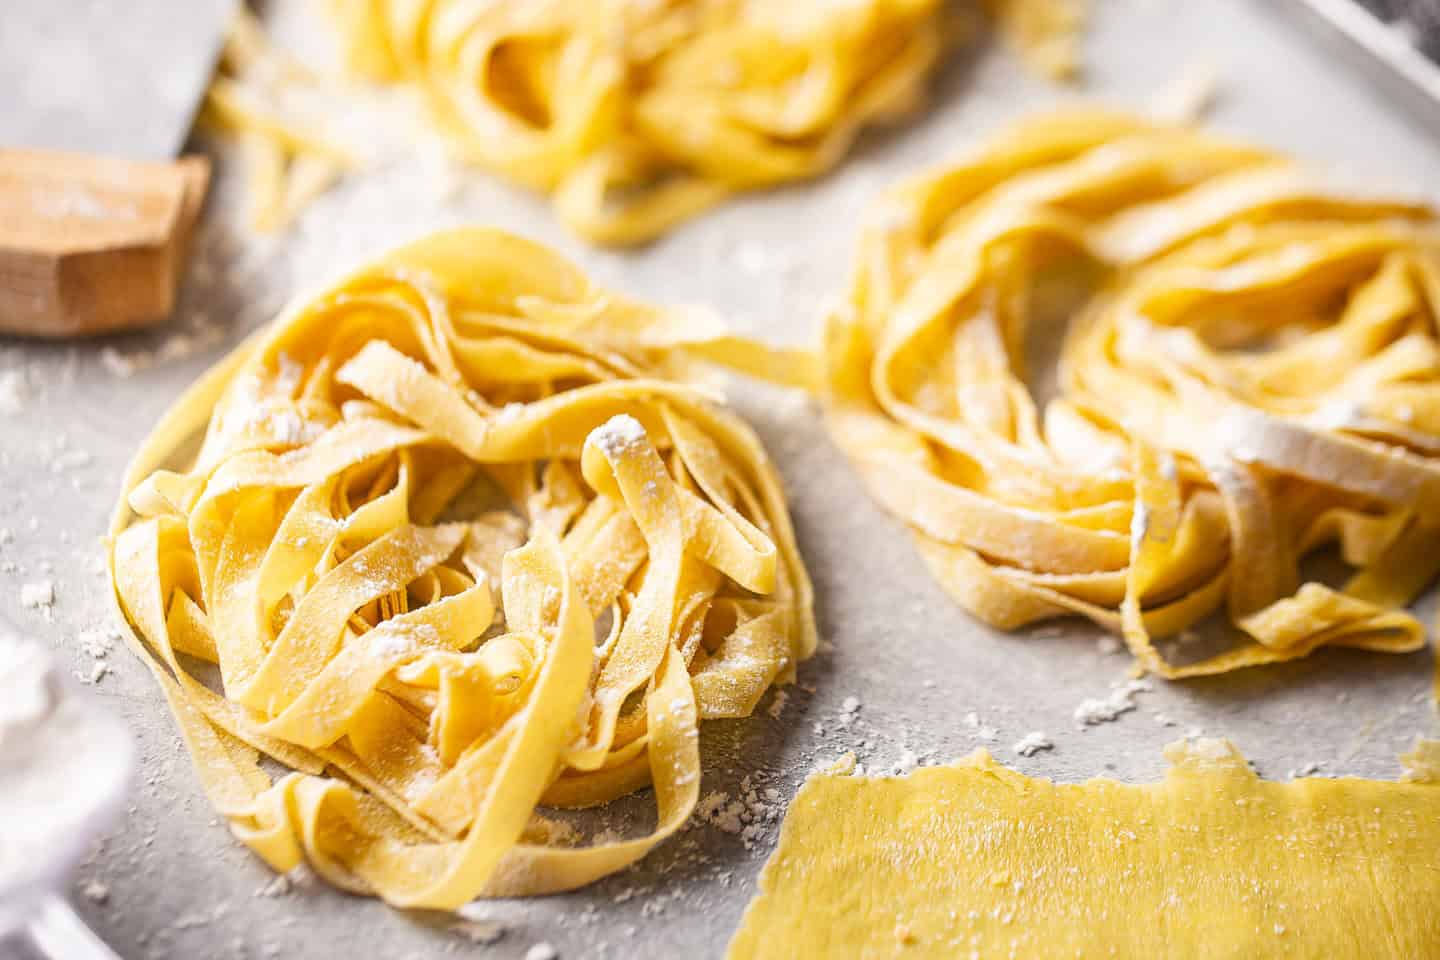 Homemade pasta recipes featuring freshly made tagliatelle.